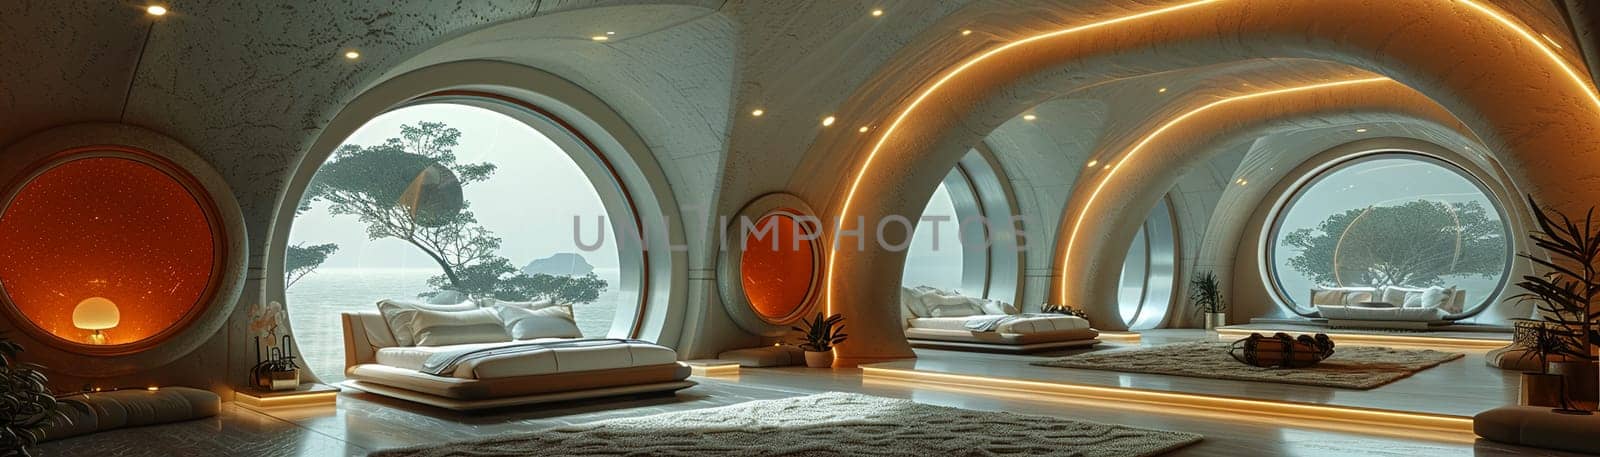 Futuristic bedroom with dynamic lighting and modular furniture3D render.